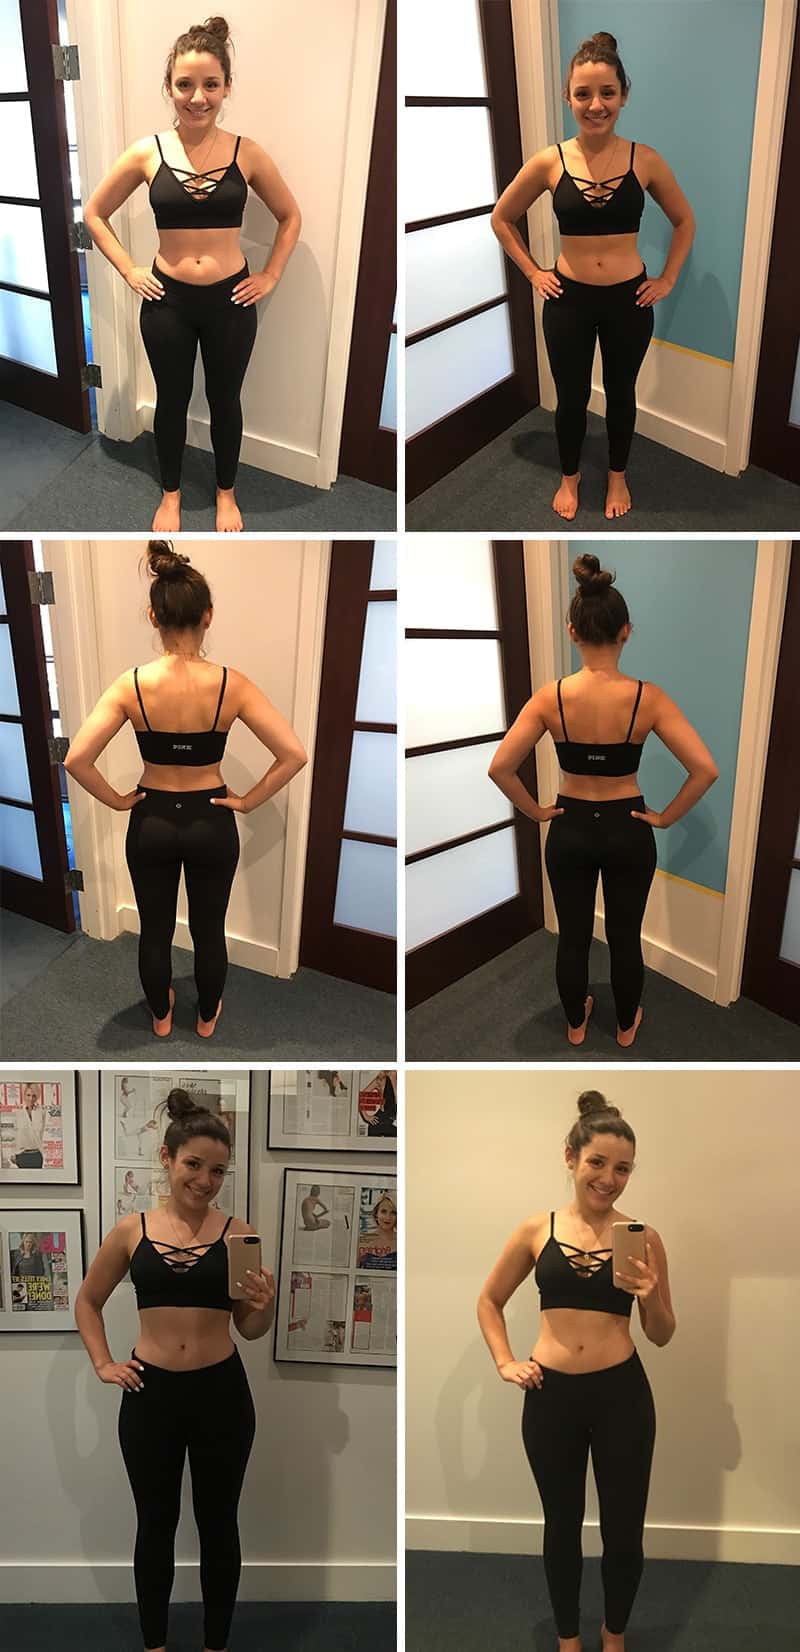 My current fitness routine - - one month before and after Physique 57